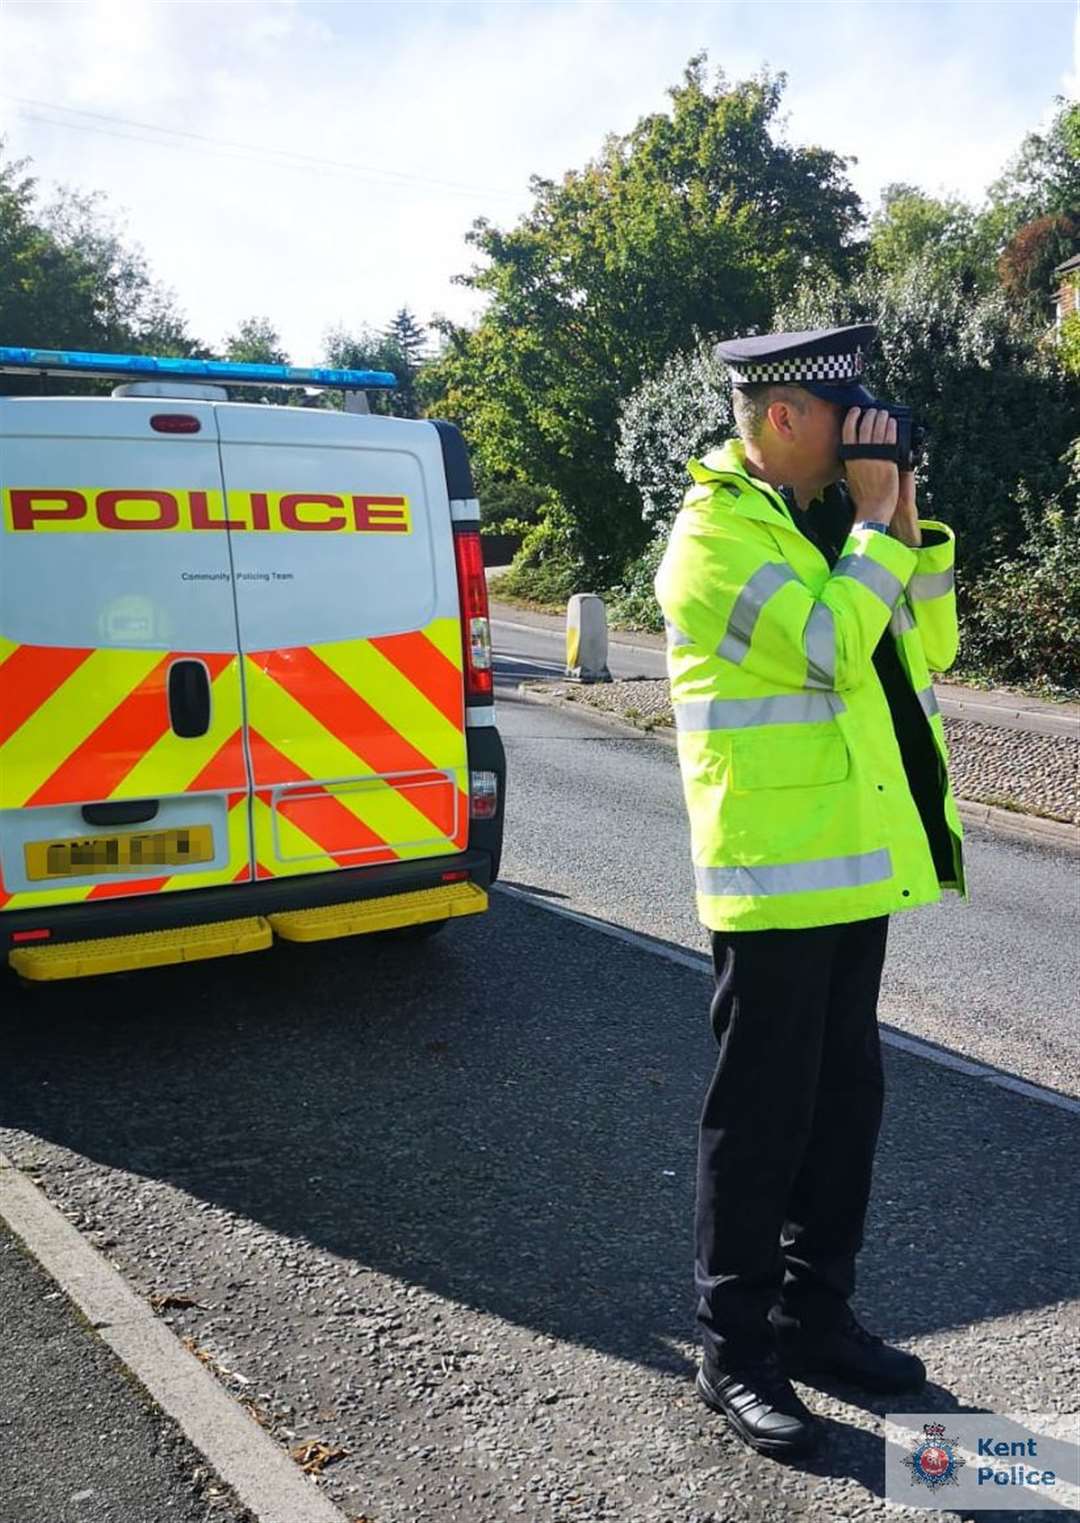 Kent Police are reminding drivers to stick to the speed limit despite quieter roads in lockdown